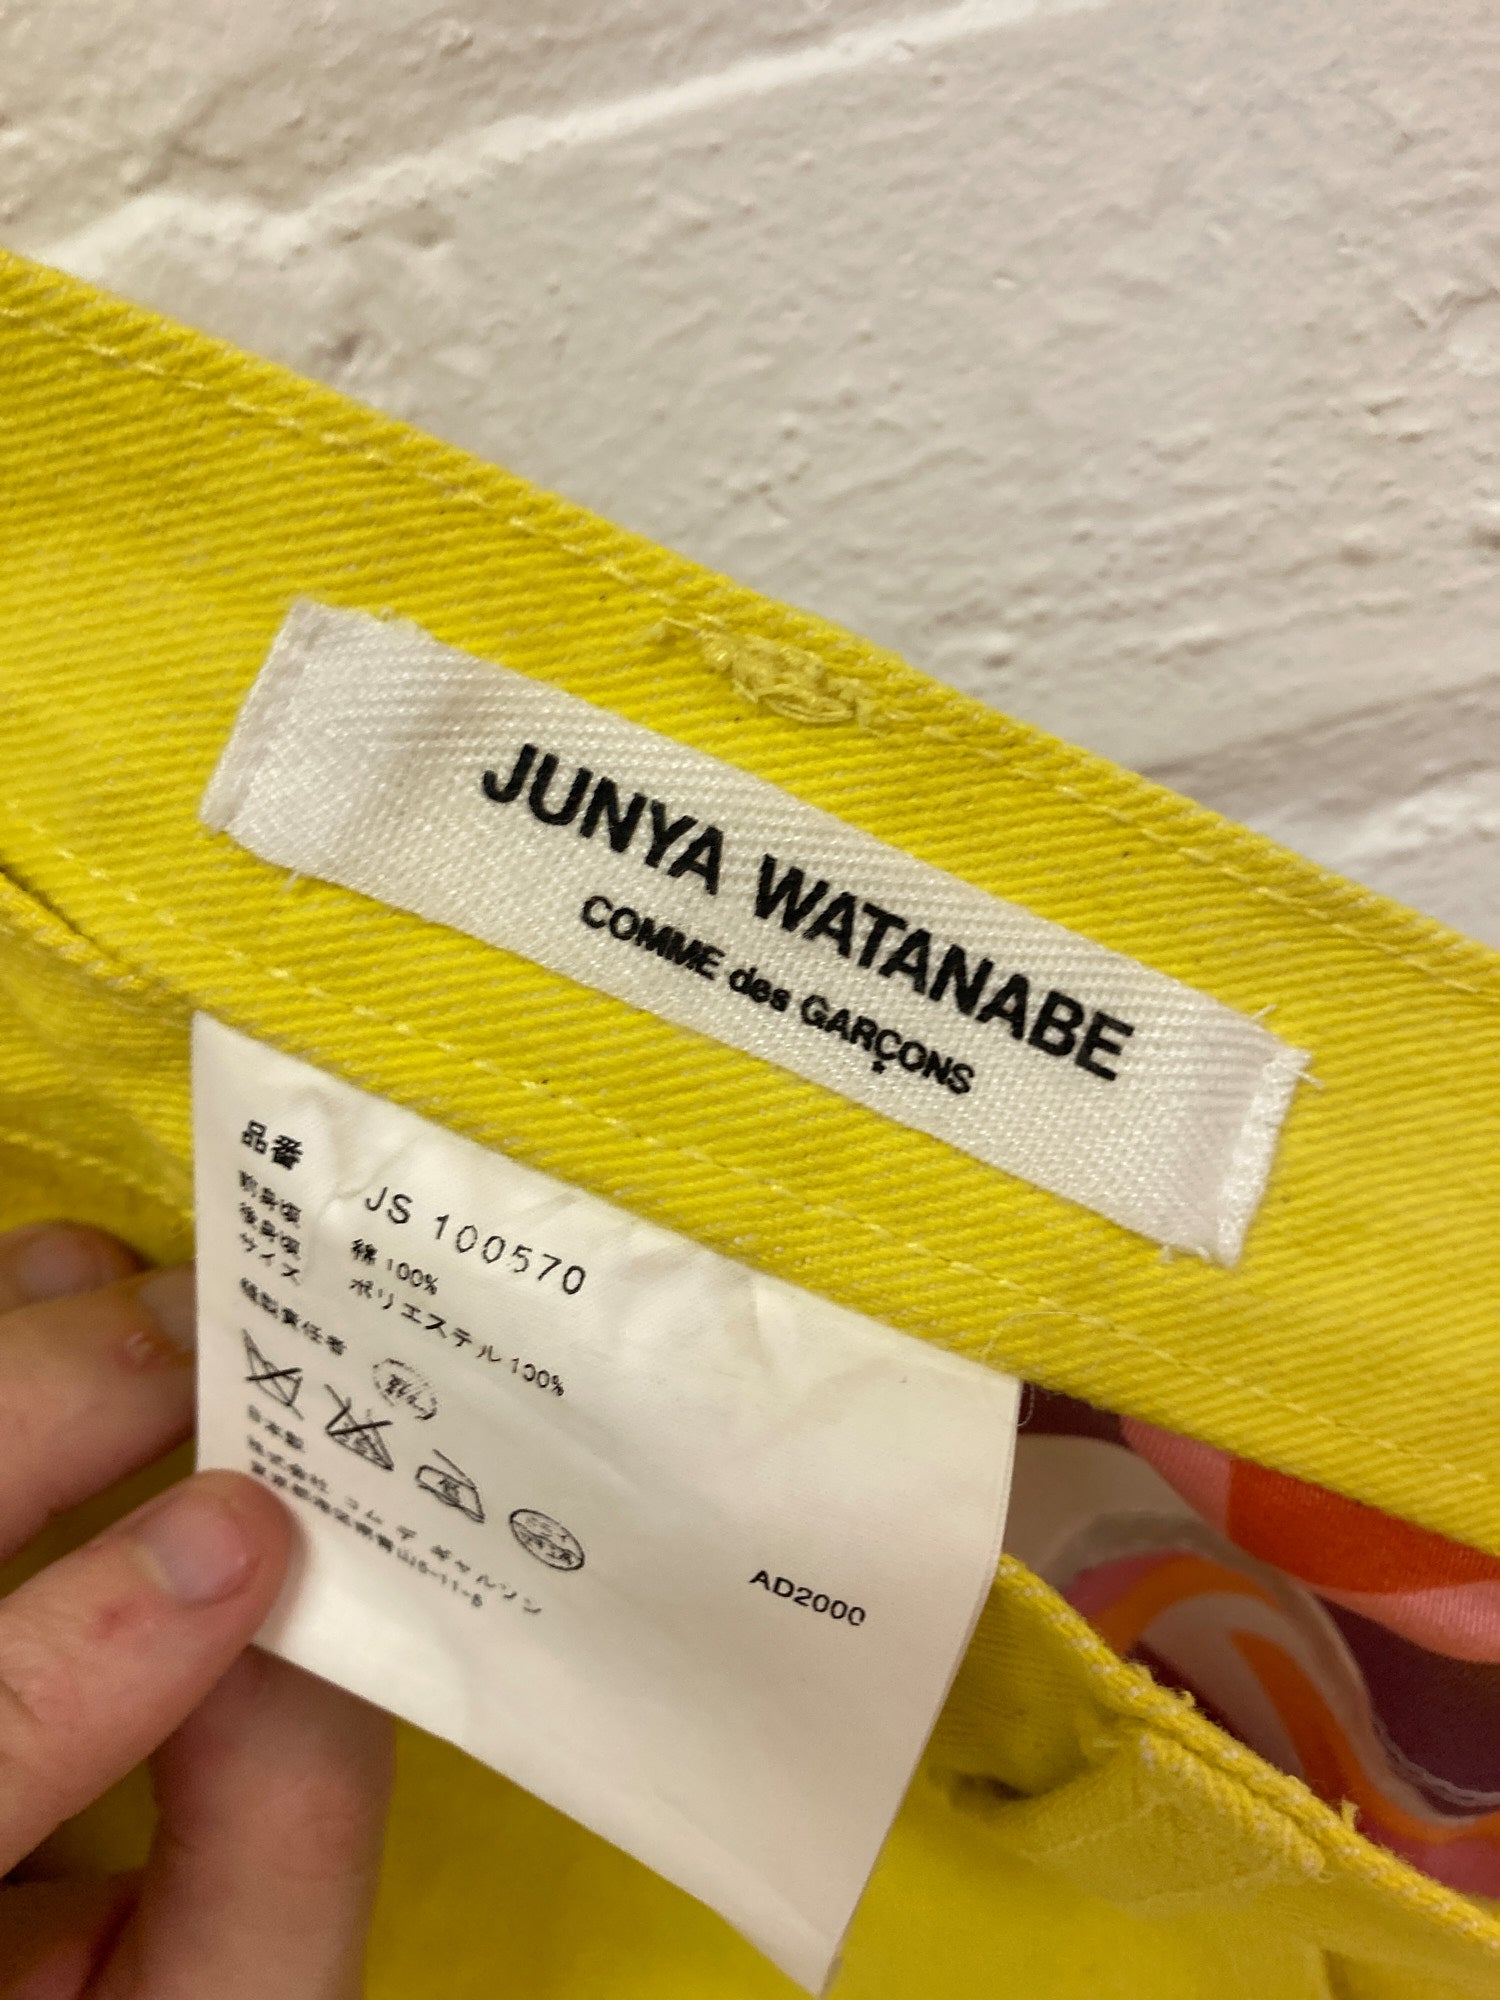 Junya Watanabe Comme des Garcons SS2001 yellow denim skirt with satin back